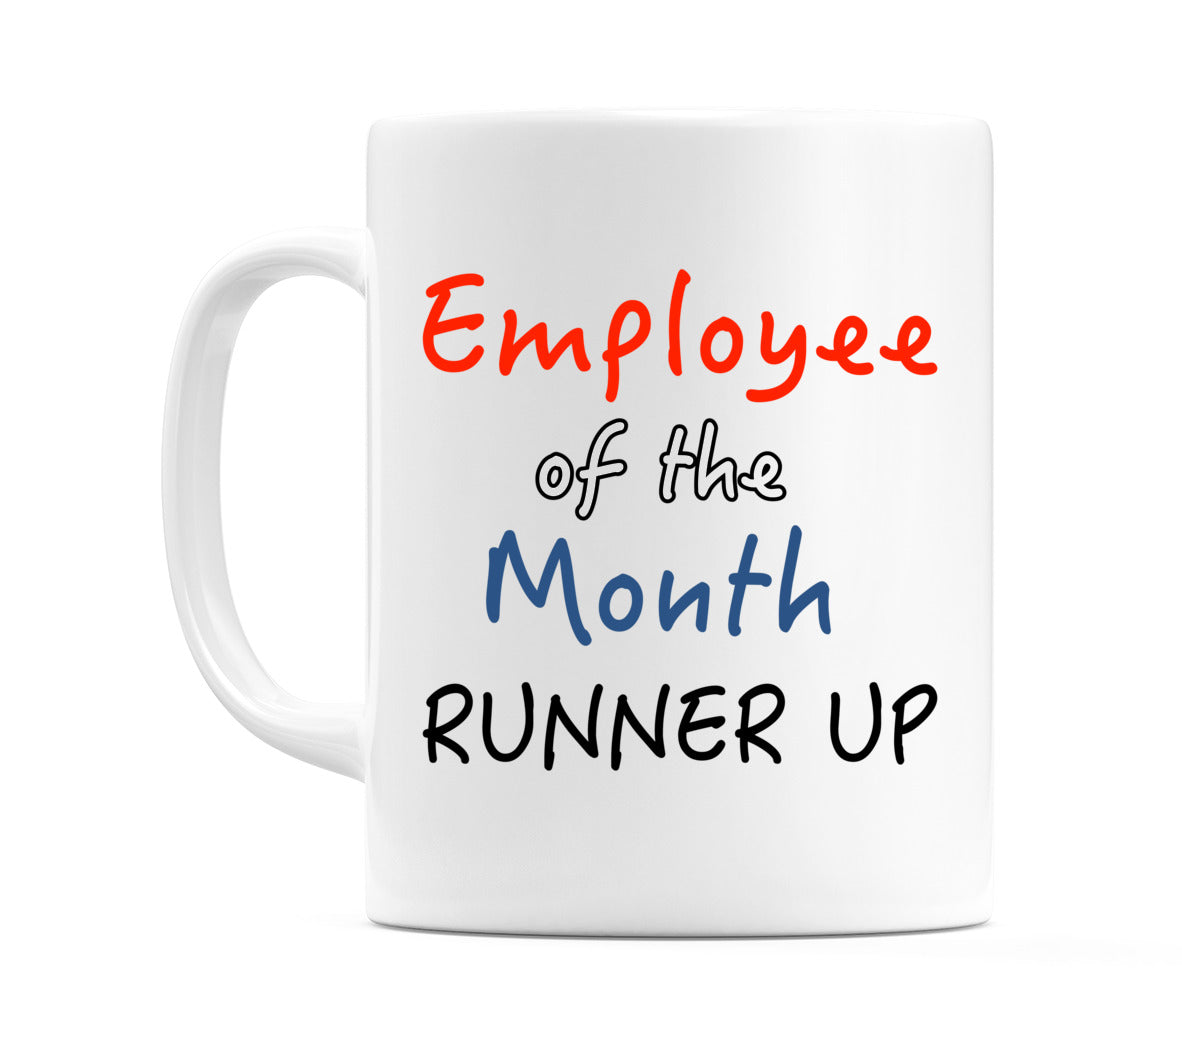 Employee of the month runner up